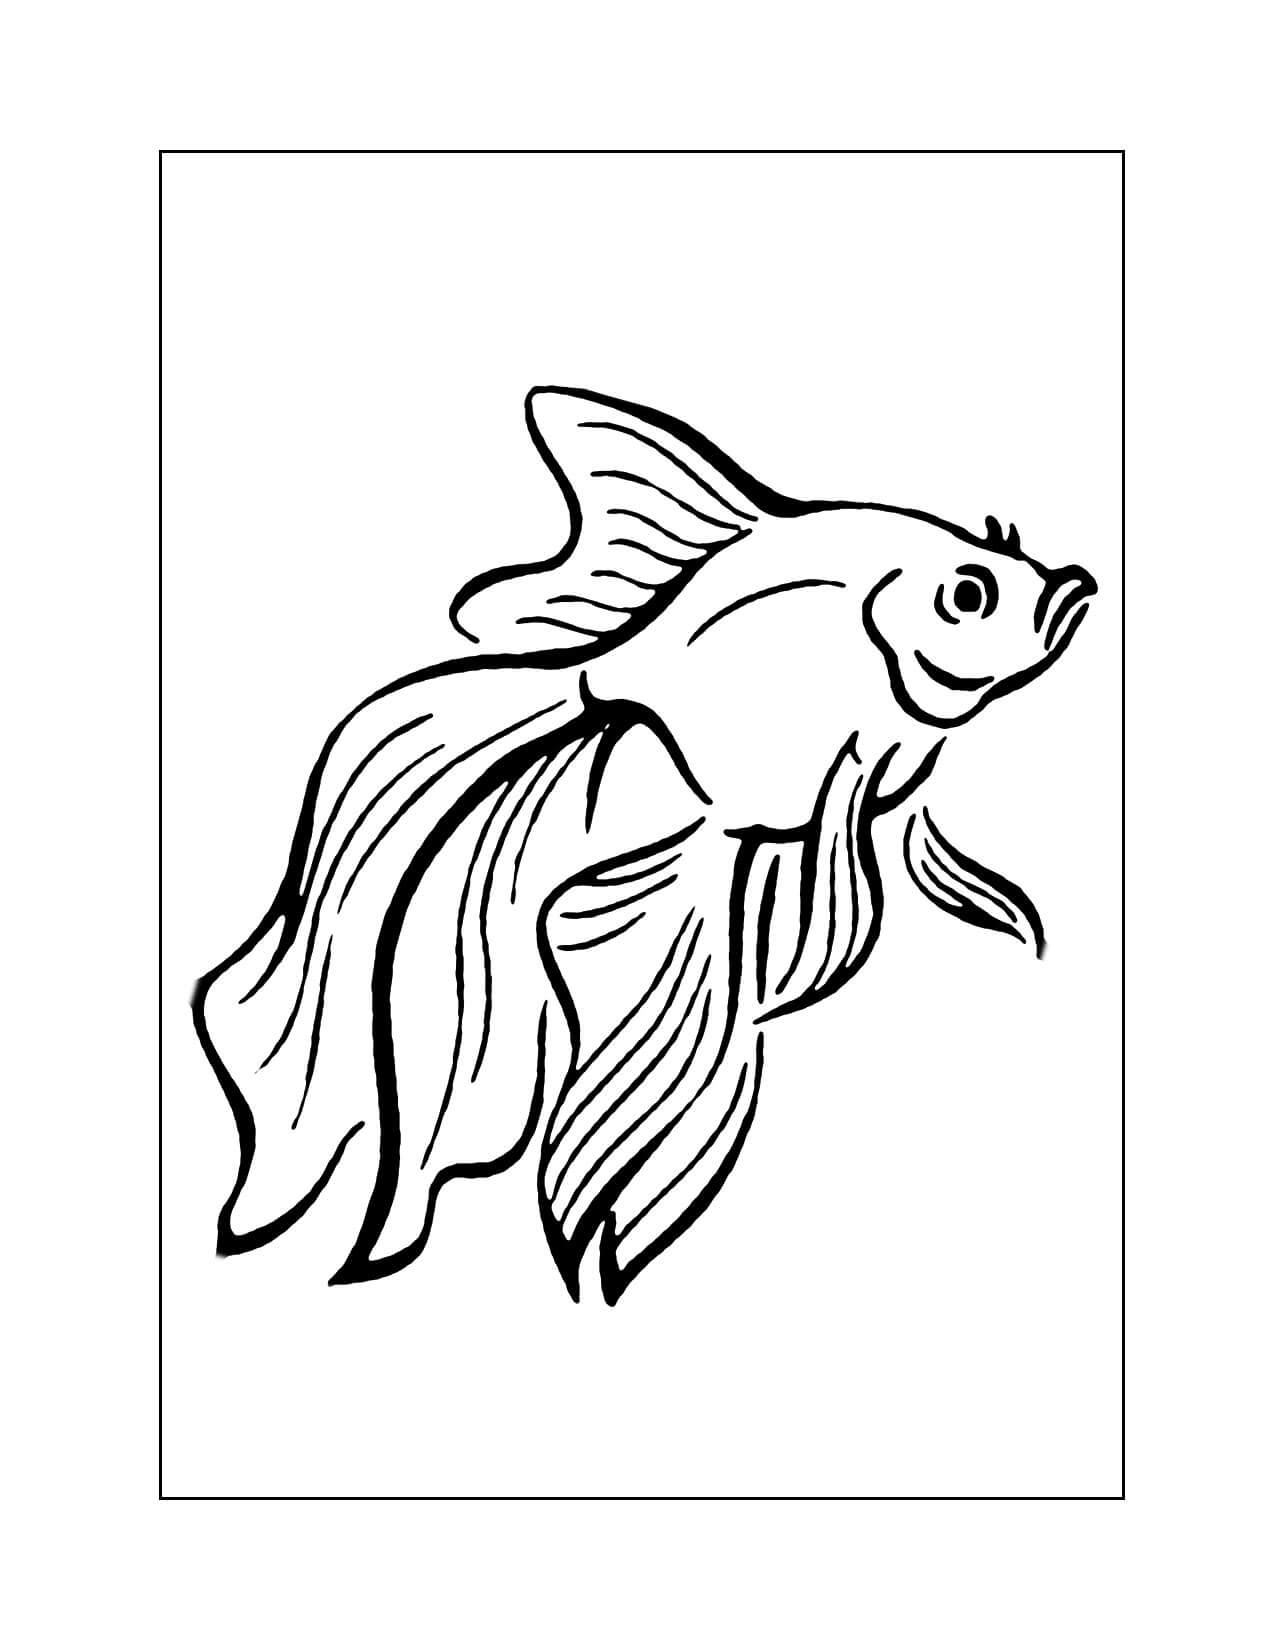 Elegant Fish With Long Fins Coloring Page